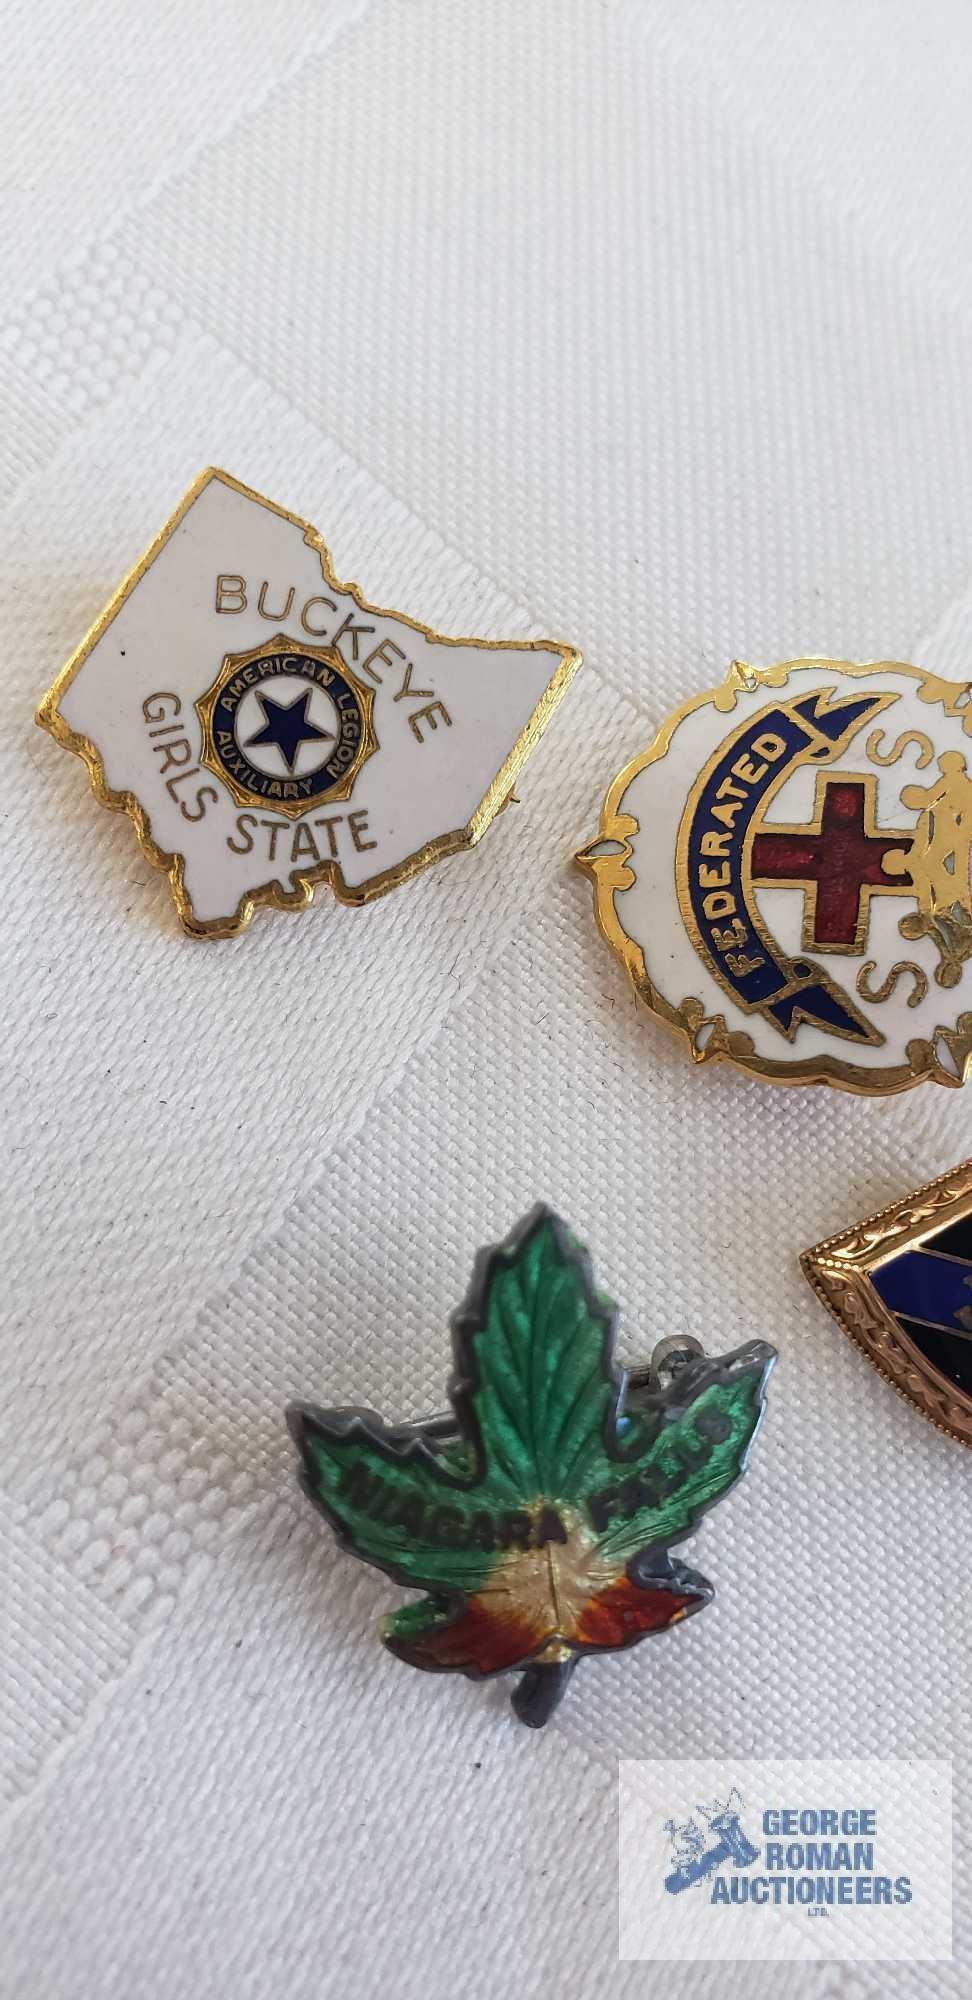 School band pins and others